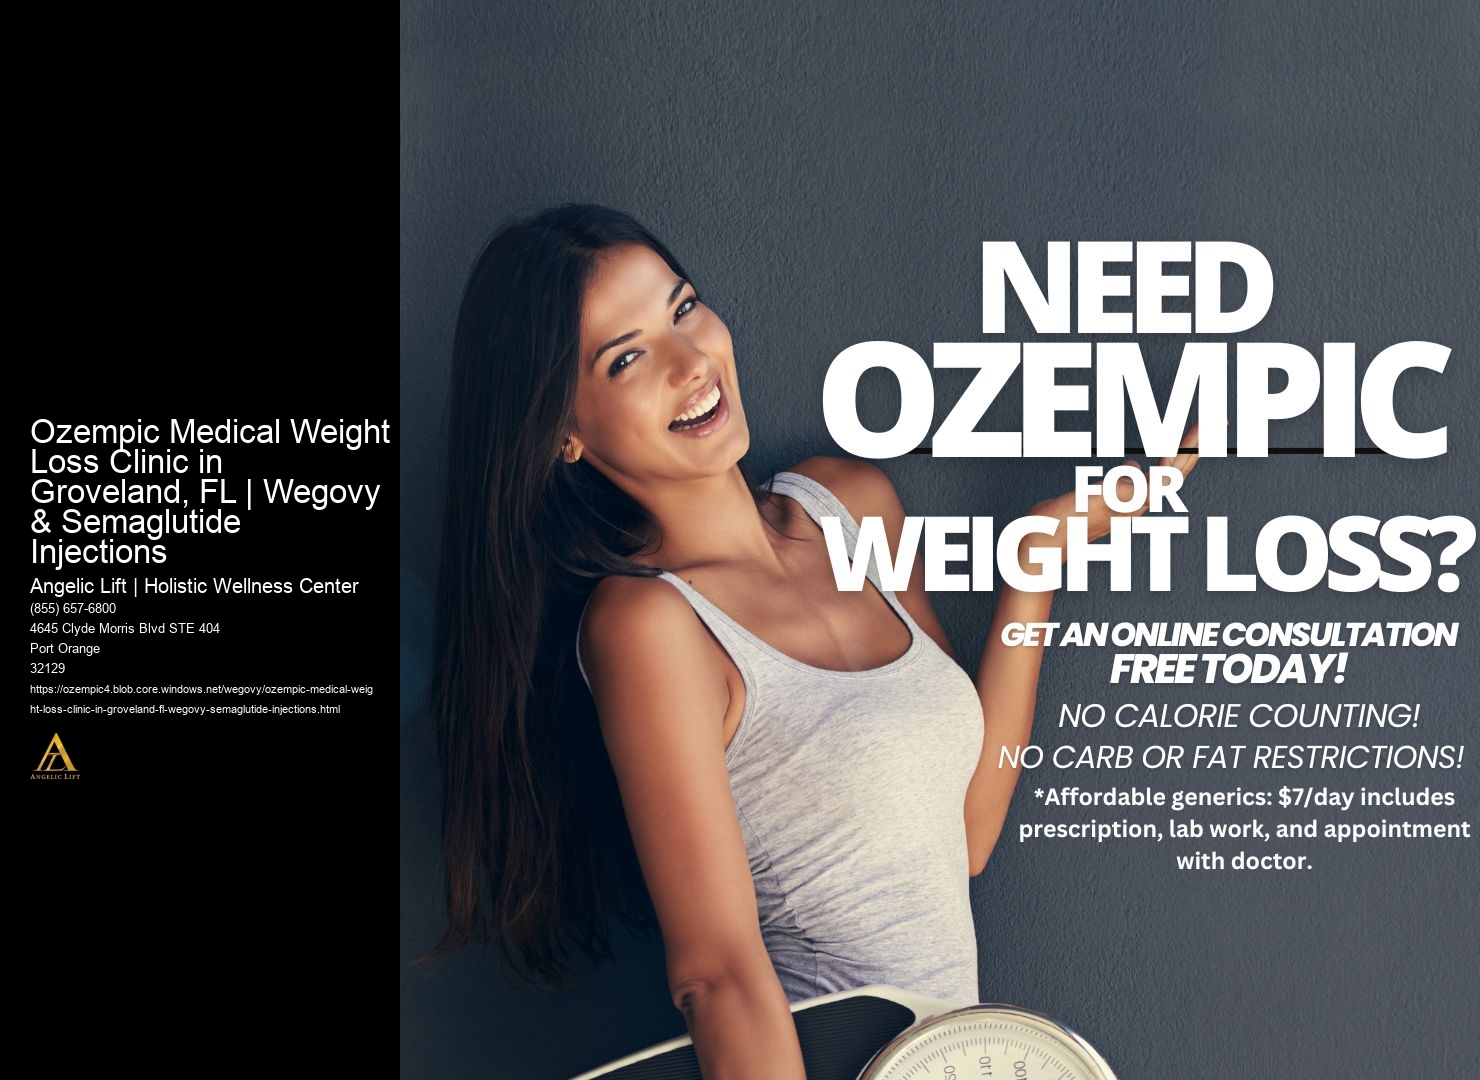 Ozempic Medical Weight Loss Clinic in Groveland, FL | Wegovy & Semaglutide Injections